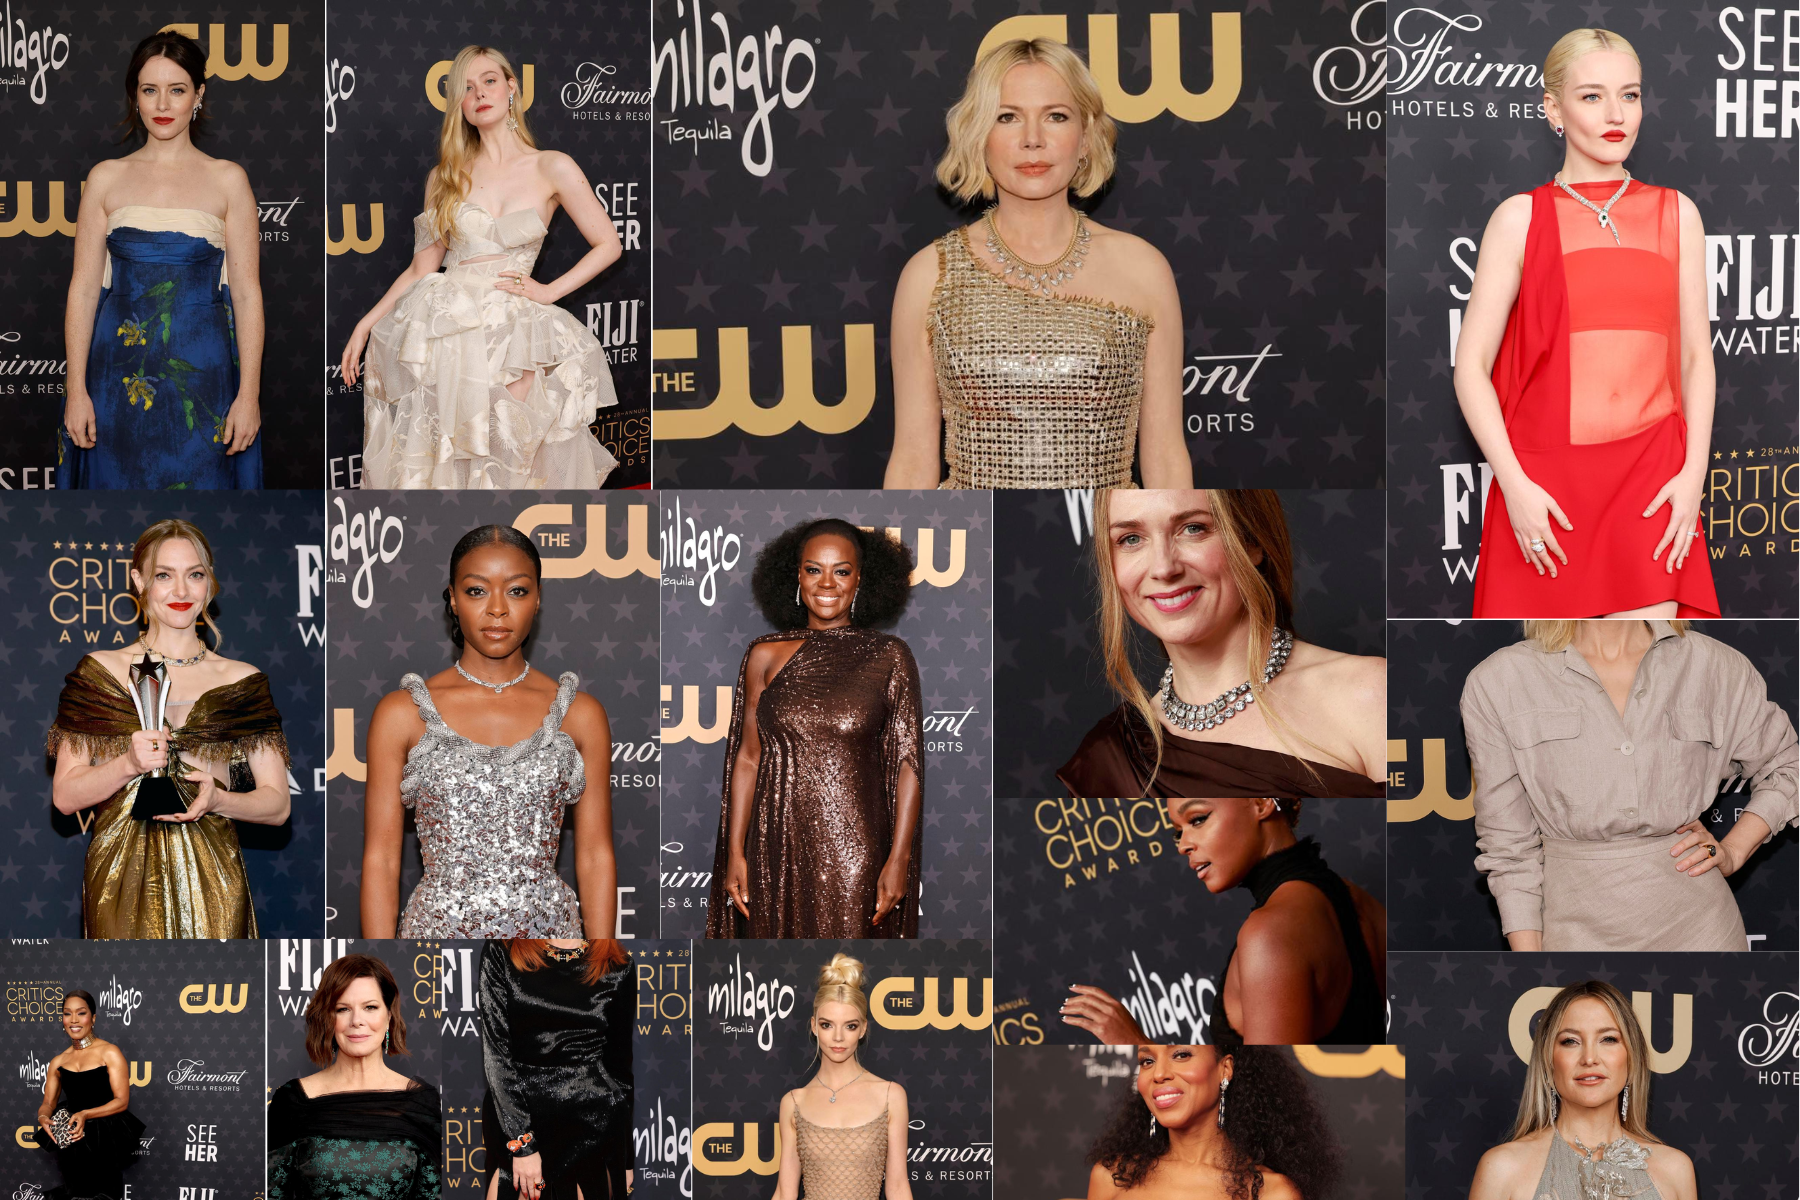 At the Critic's Choice Awards, 16 of the best Hollywood actresses wore stunning jewels